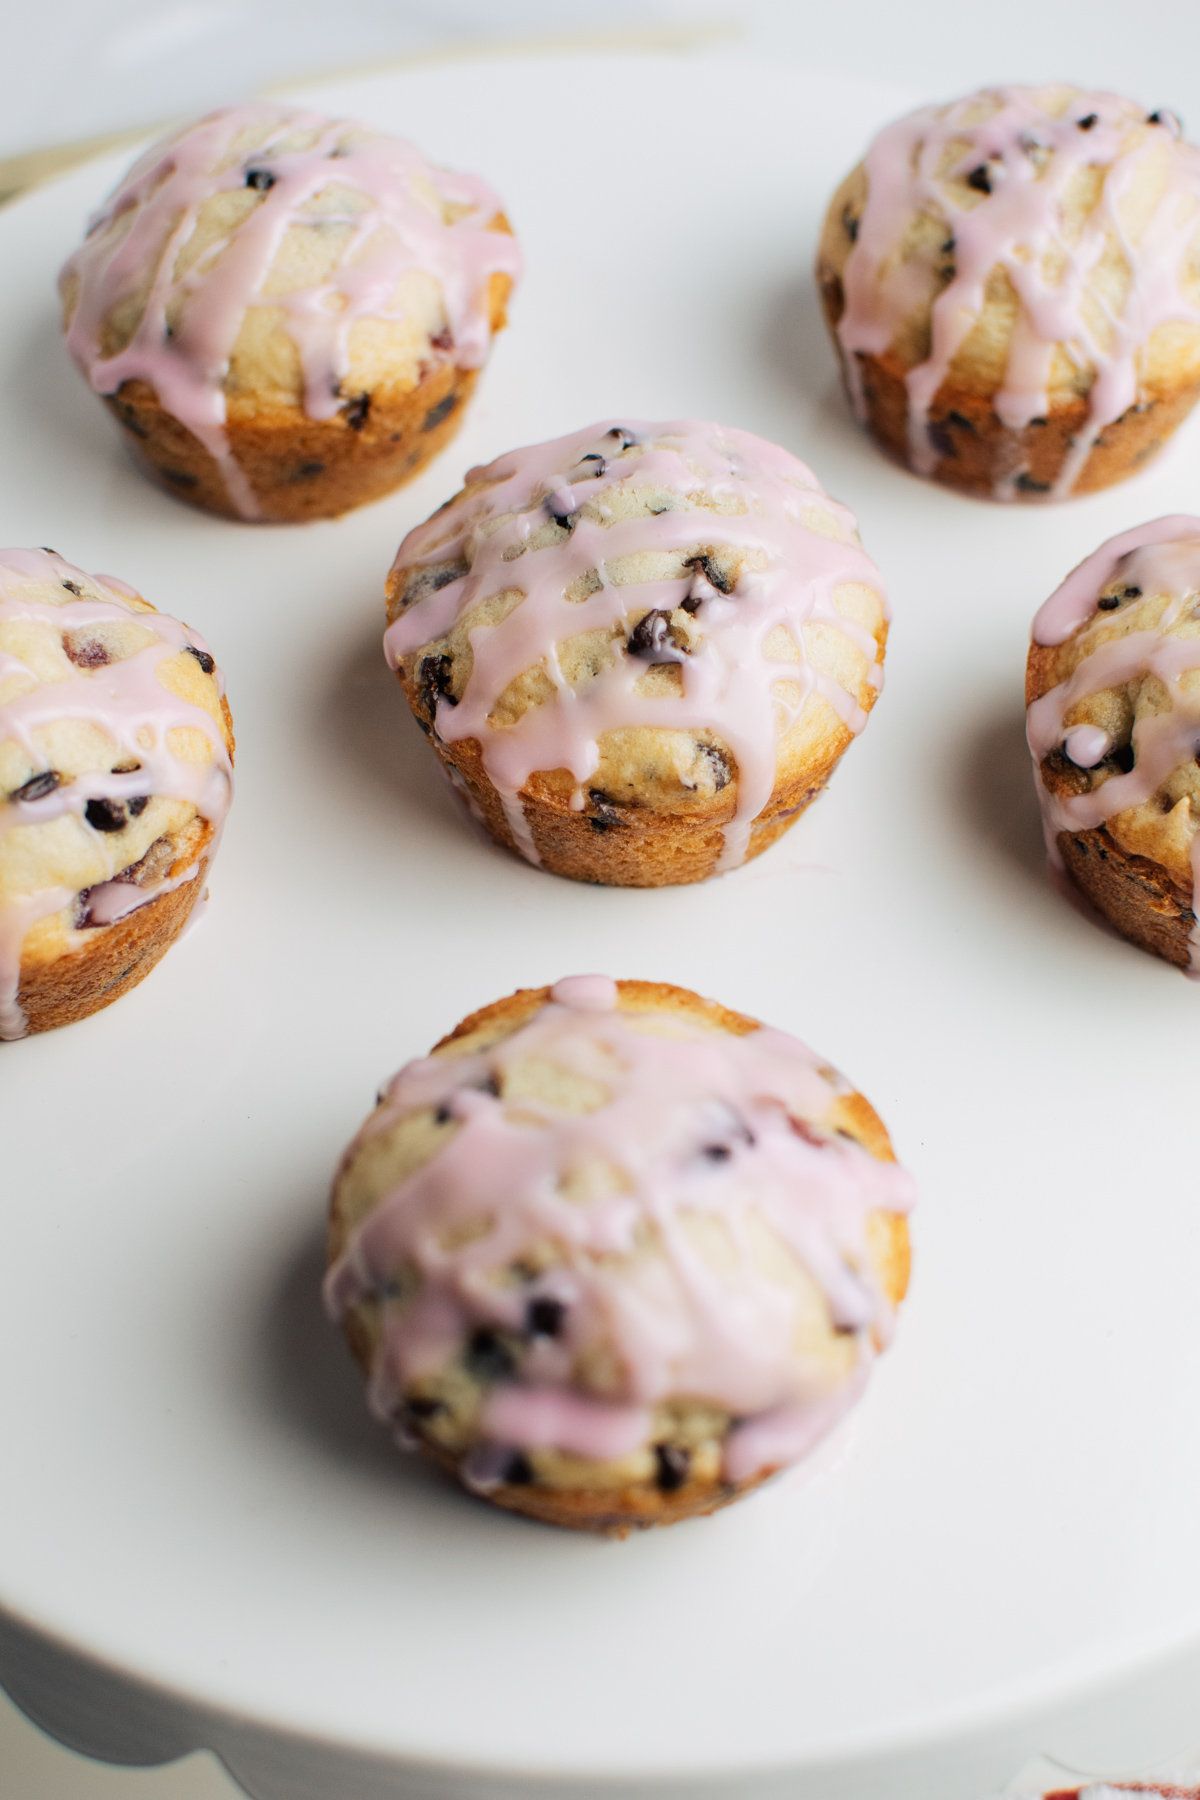 Cherry muffins with chocolate chips and pink glaze on white cake stand.